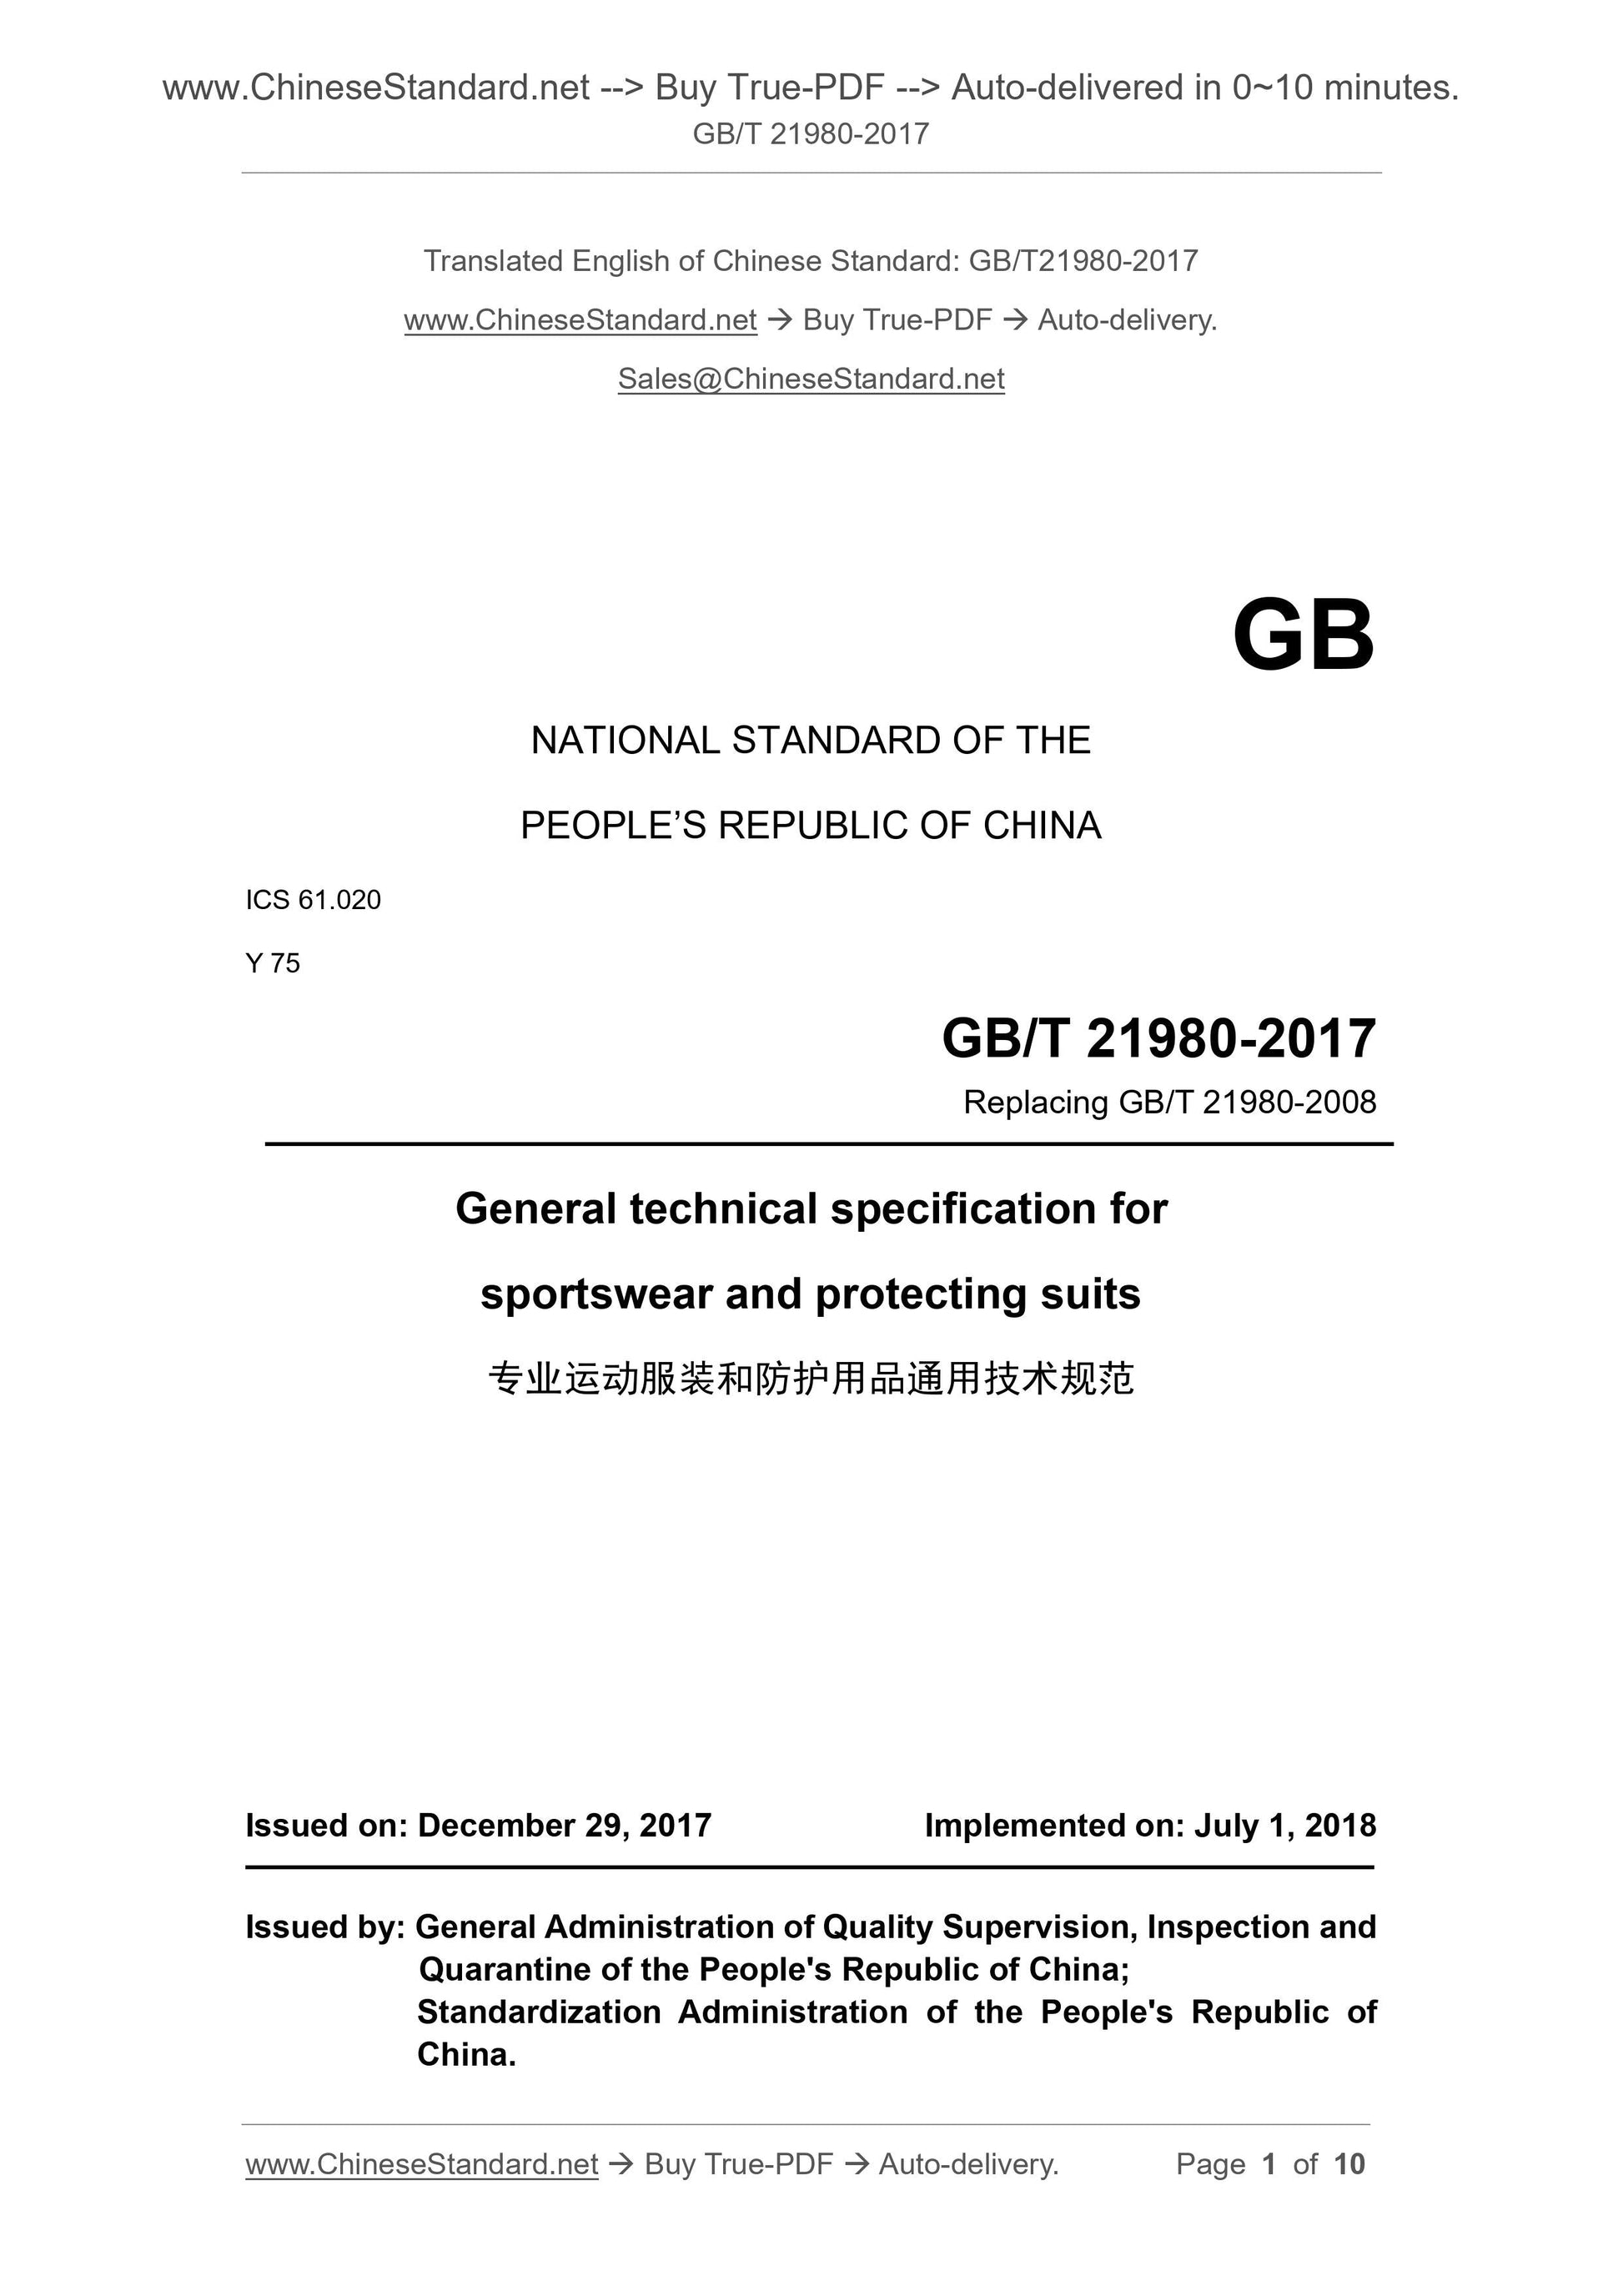 GB/T 21980-2017 Page 1